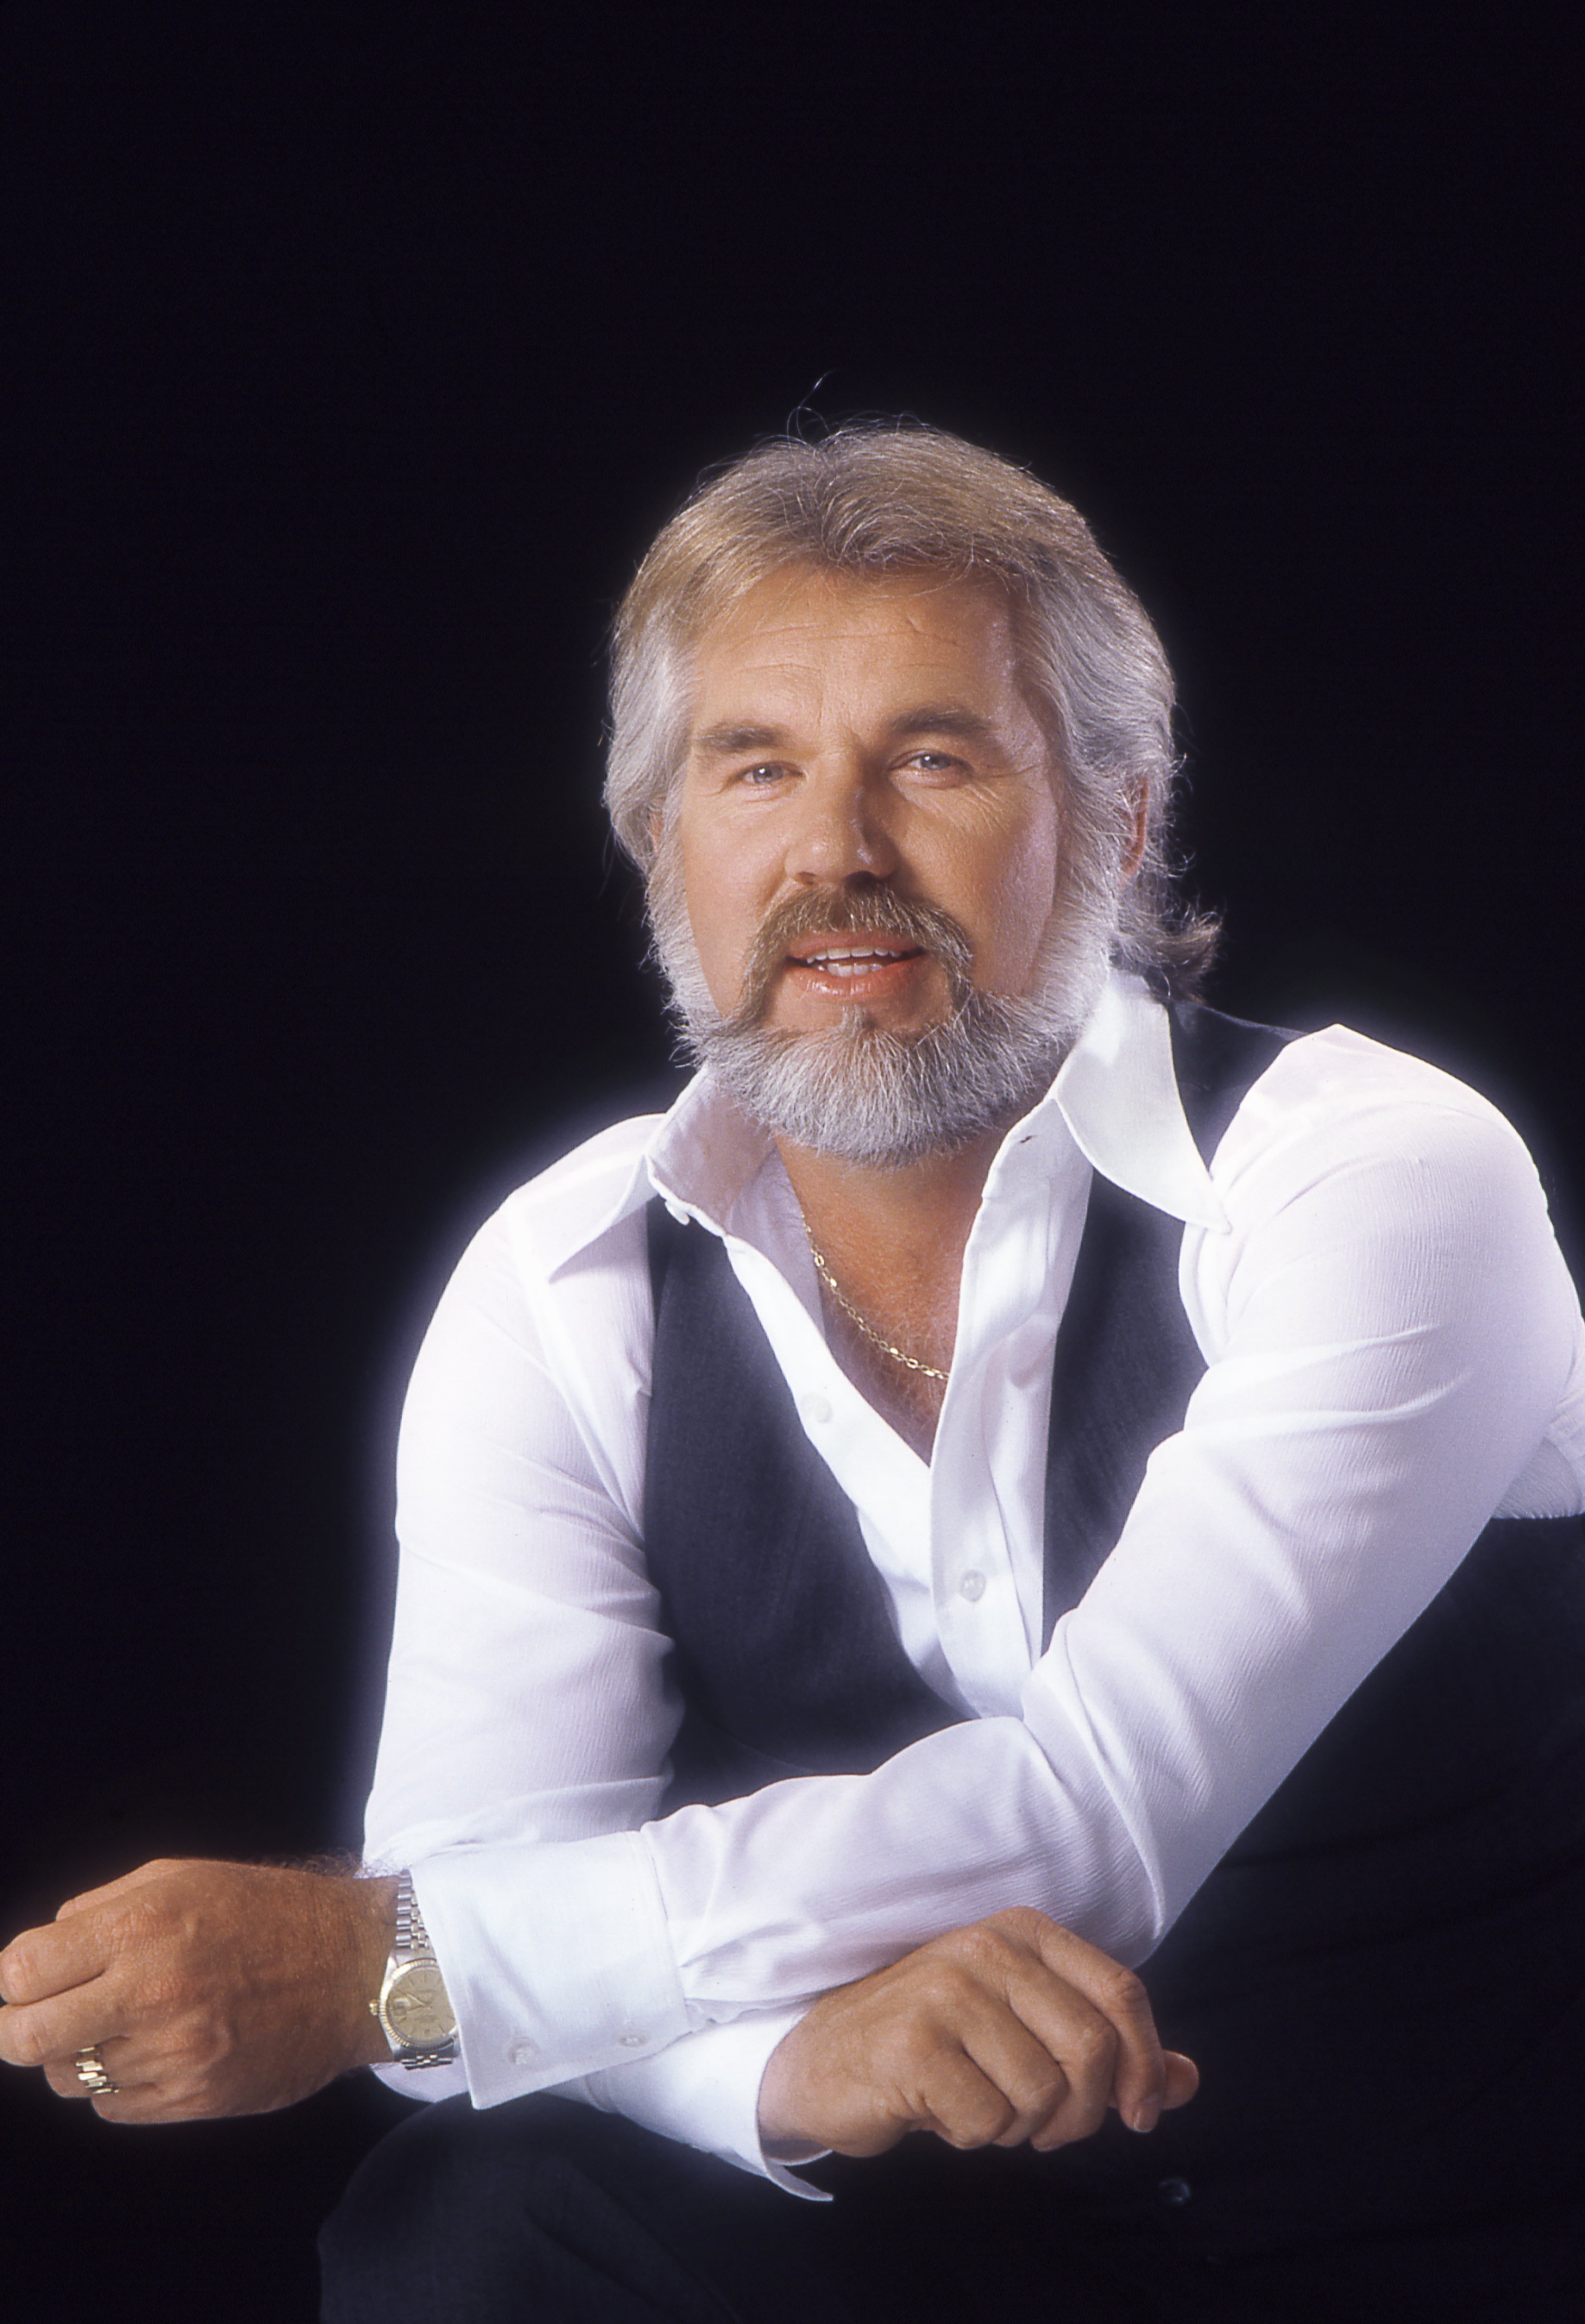 Singer Kenny Rogers poses for a portrait in 1979 in Los Angeles, California. | Source: Getty Images